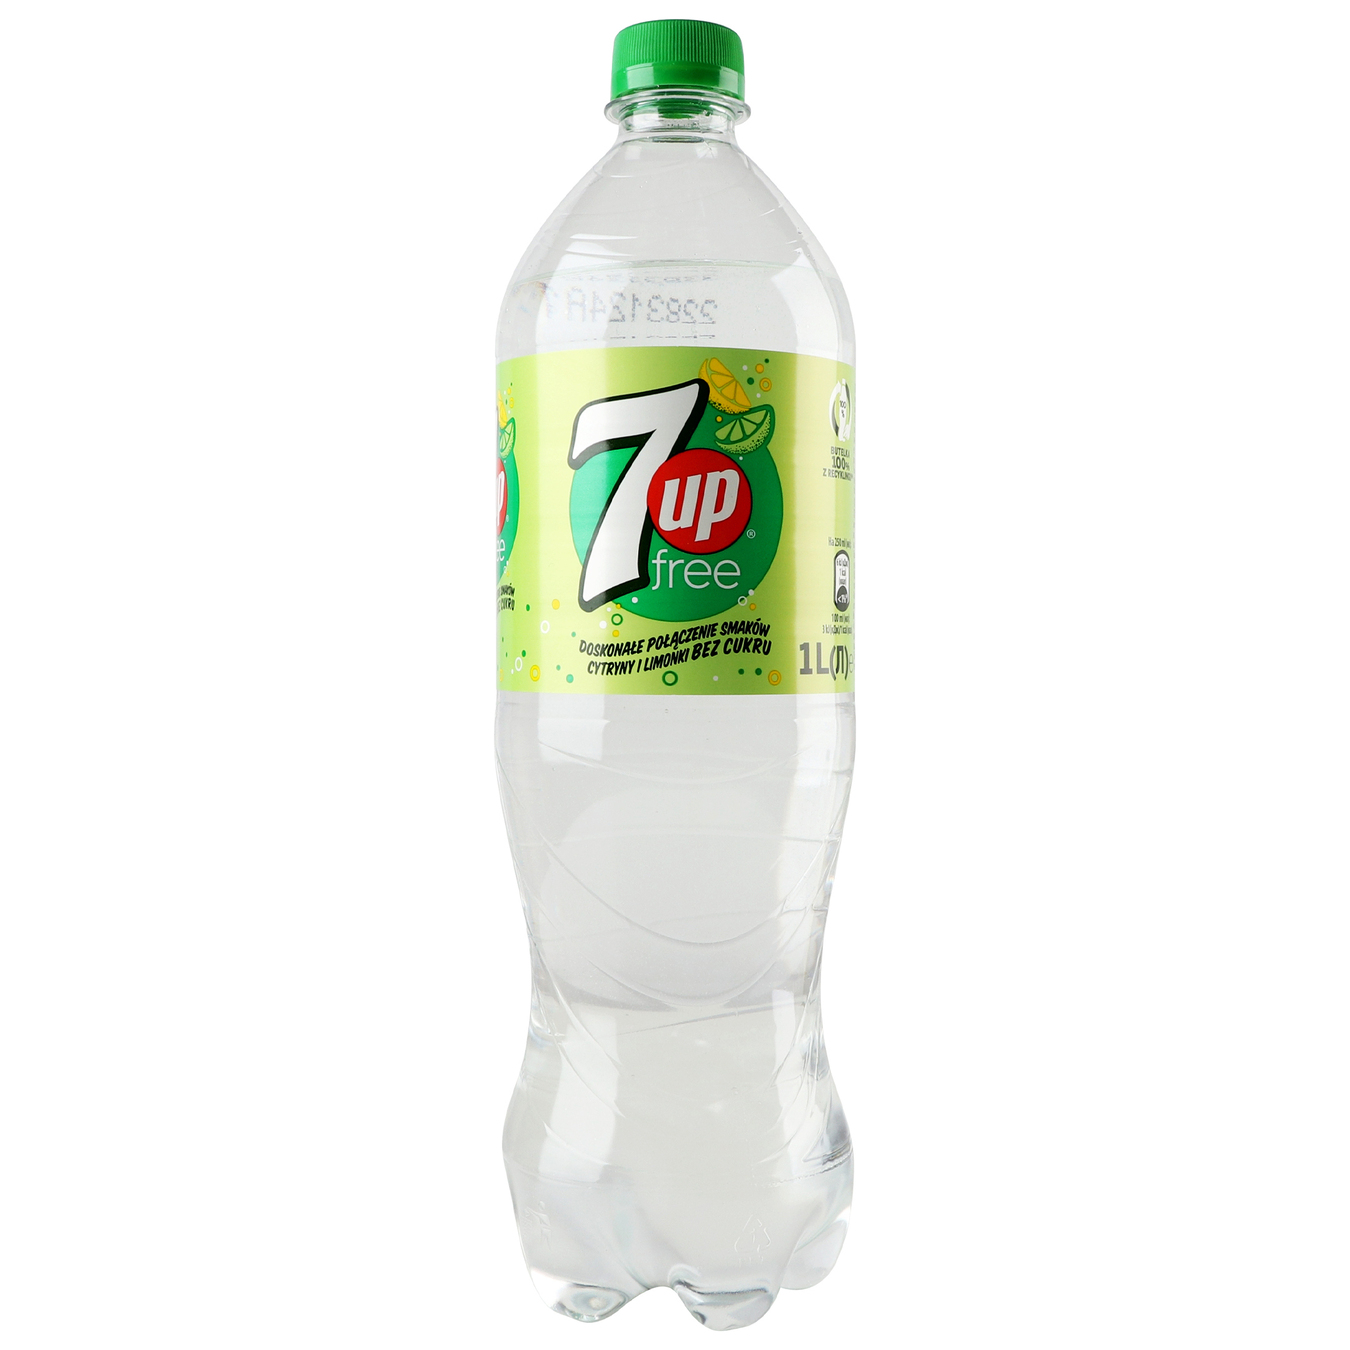 Carbonated drink 7 UP Free 1l